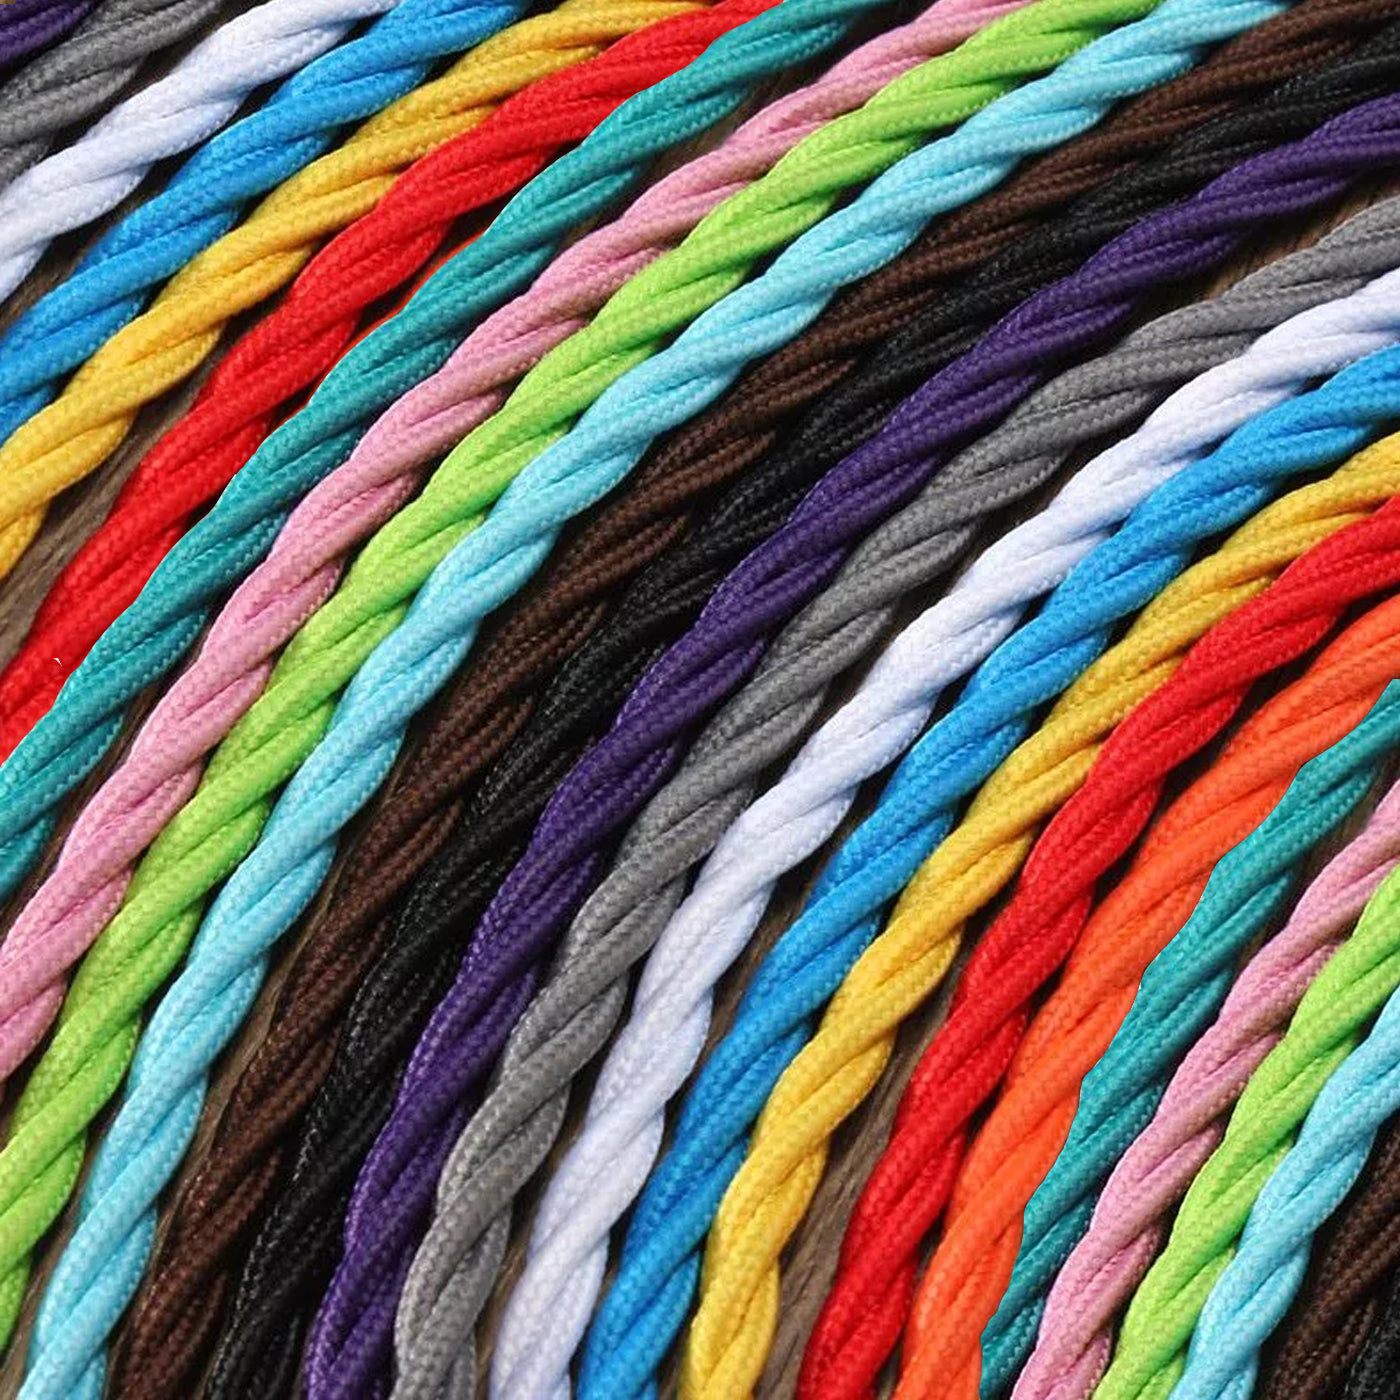 various cable color Twisted .JPG